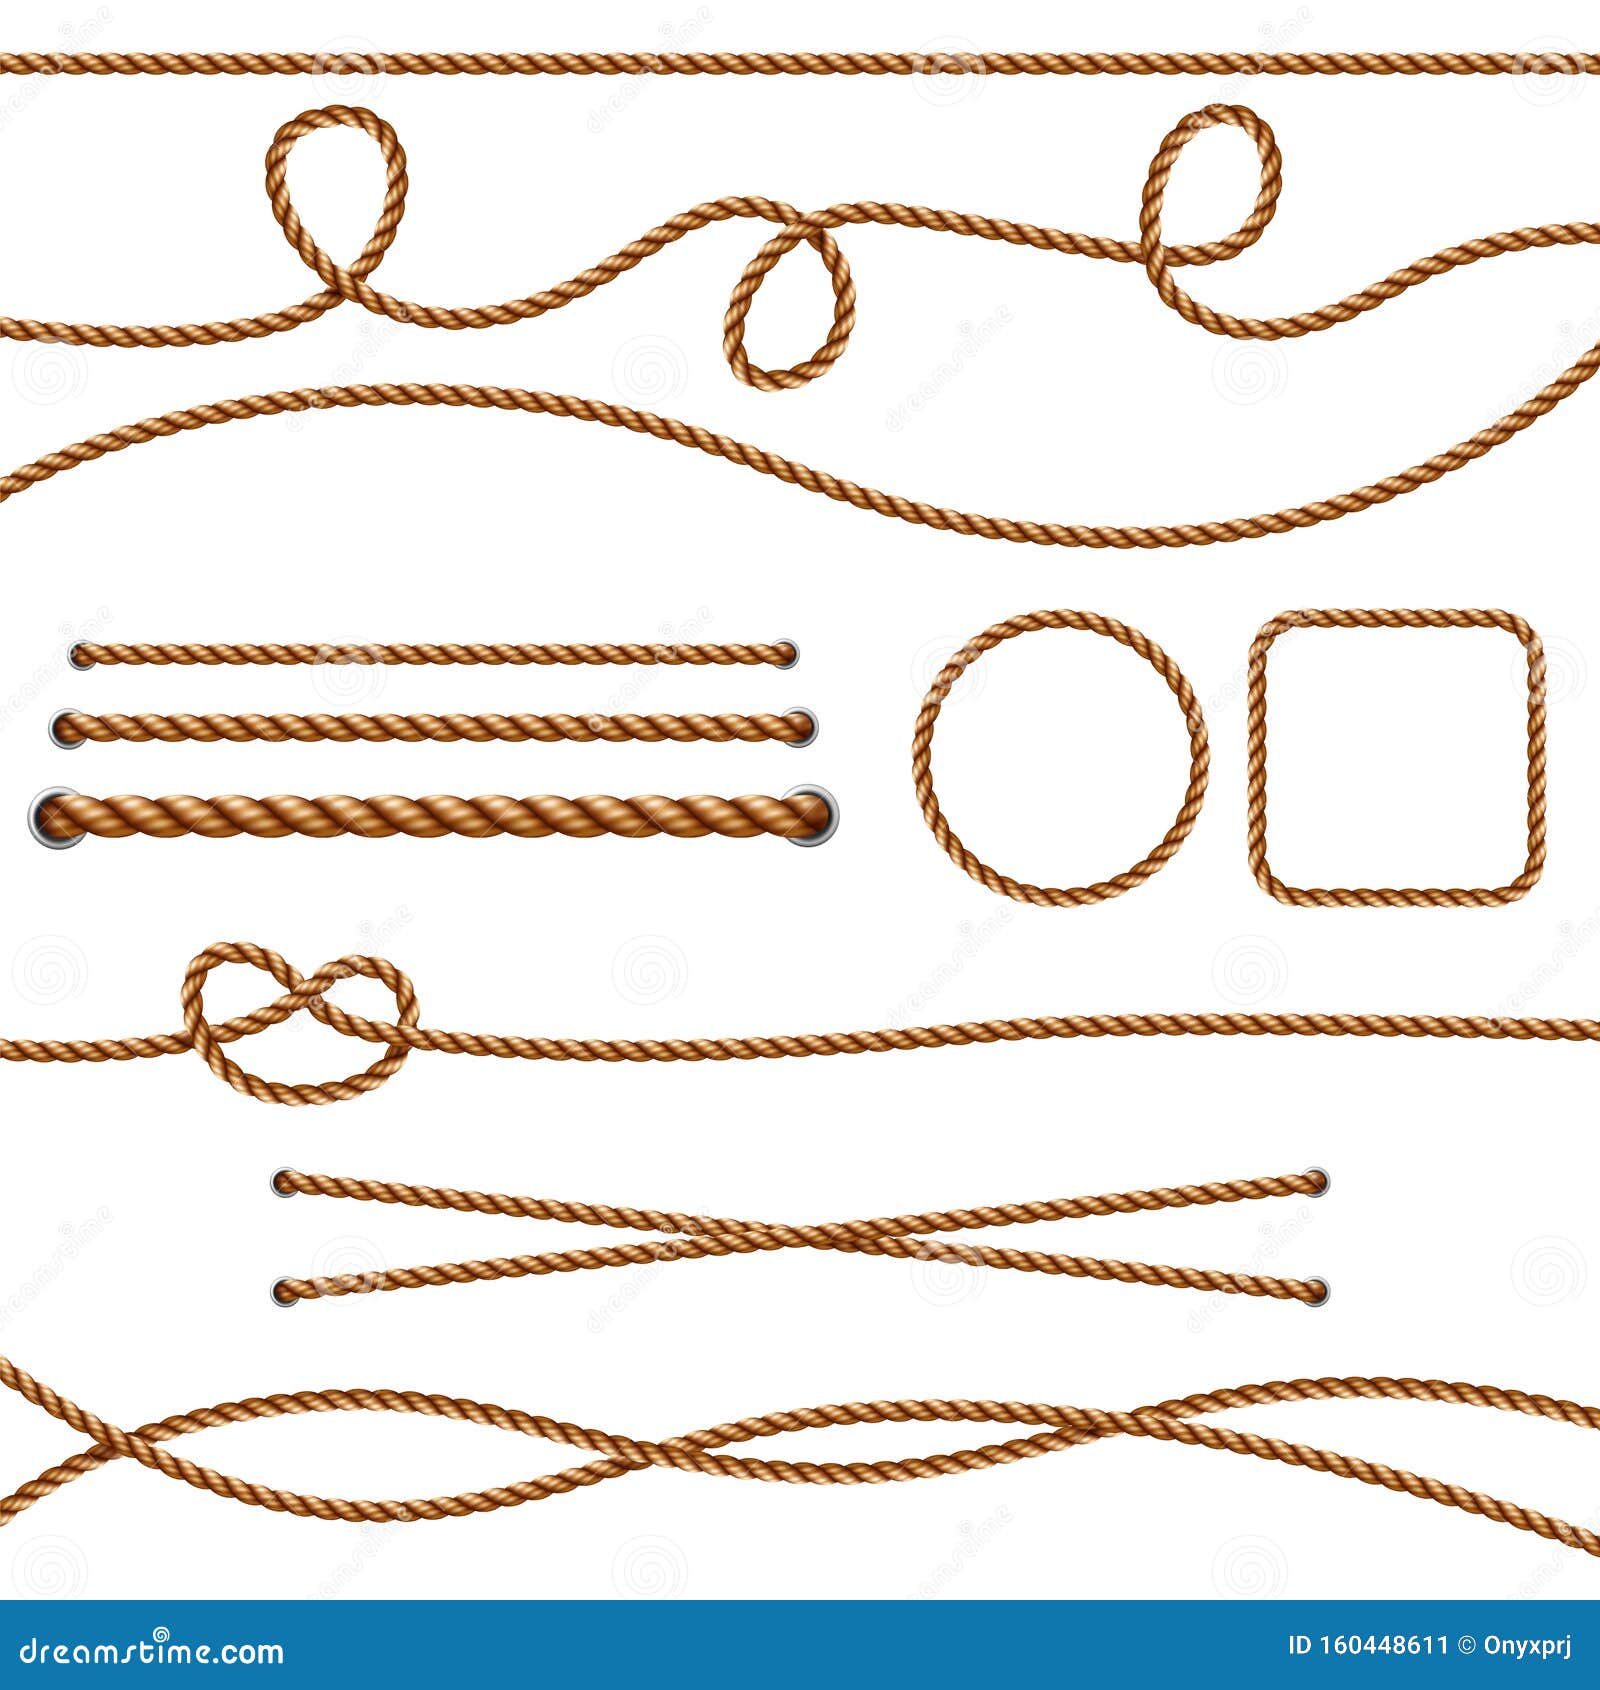 fiber ropes. straight brown realistic threads ropes crossing marine knots  pictures